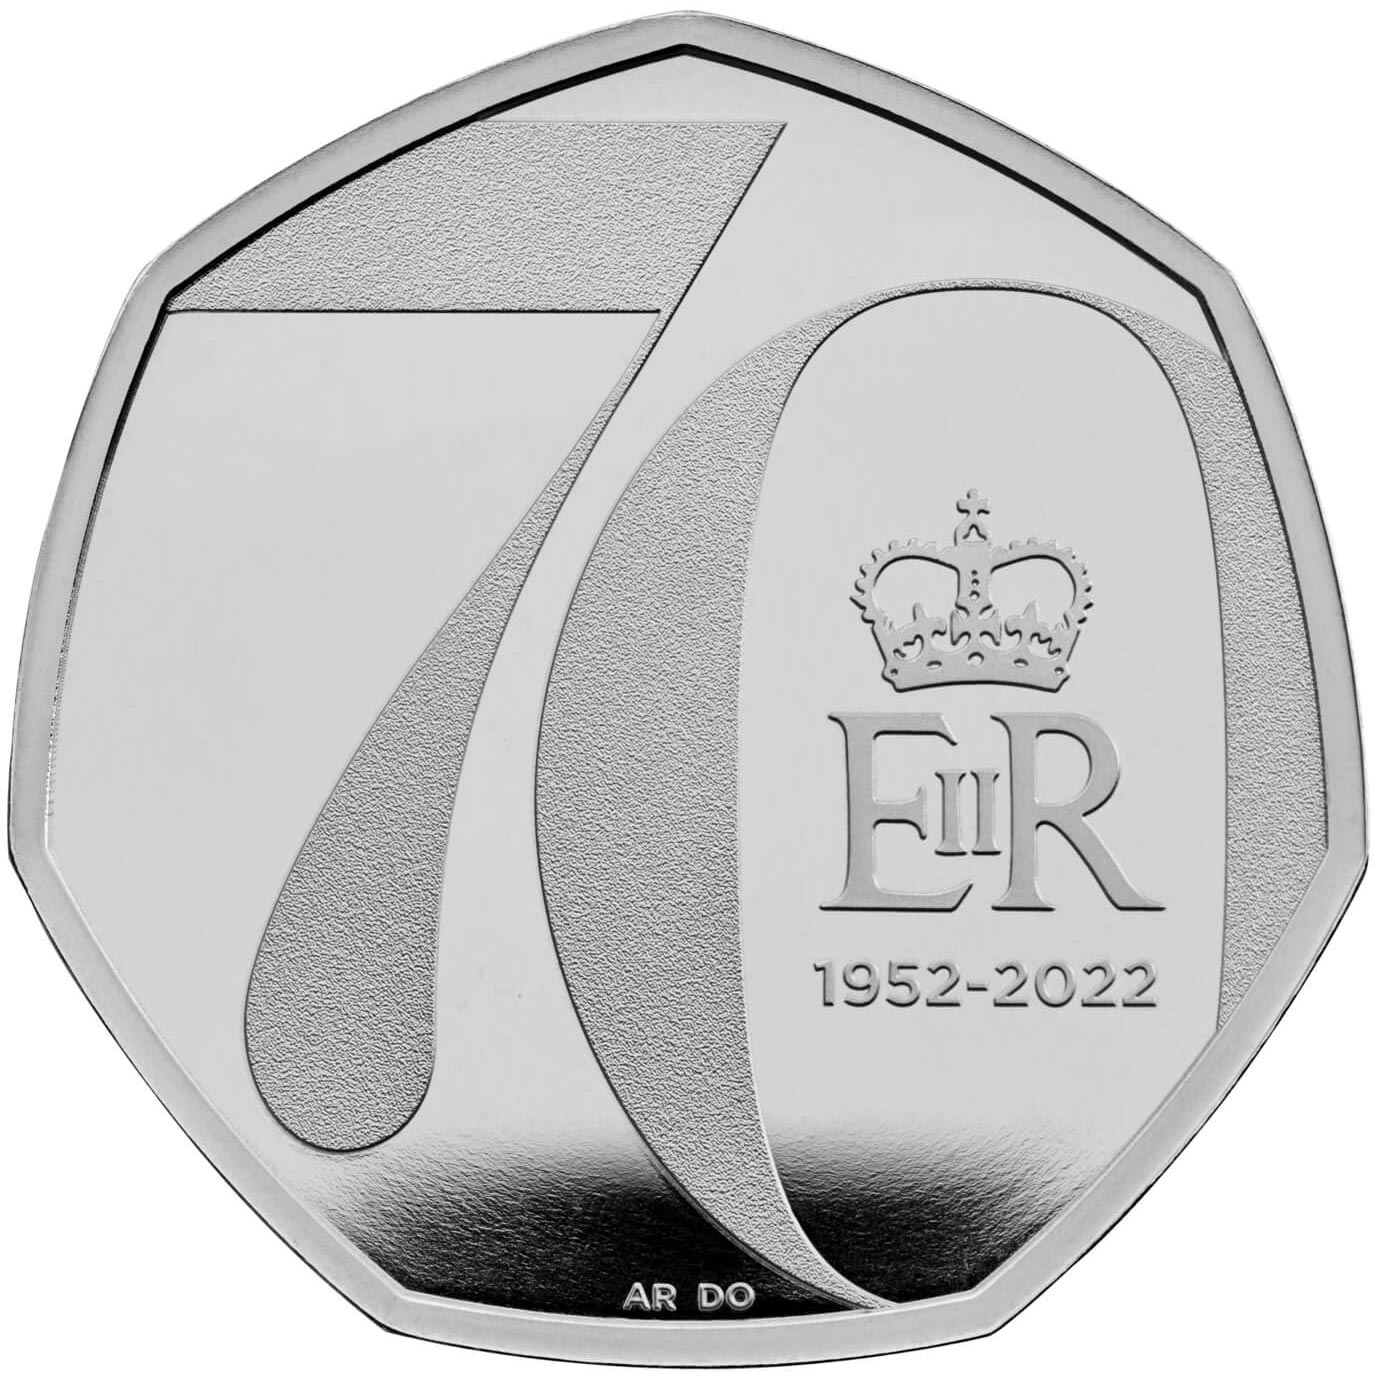 Image of 50 pence coin - The Platinum Jubilee of Her Majesty The Queen | United Kingdom 2022.  The Copper–Nickel (CuNi) coin is of UNC quality.